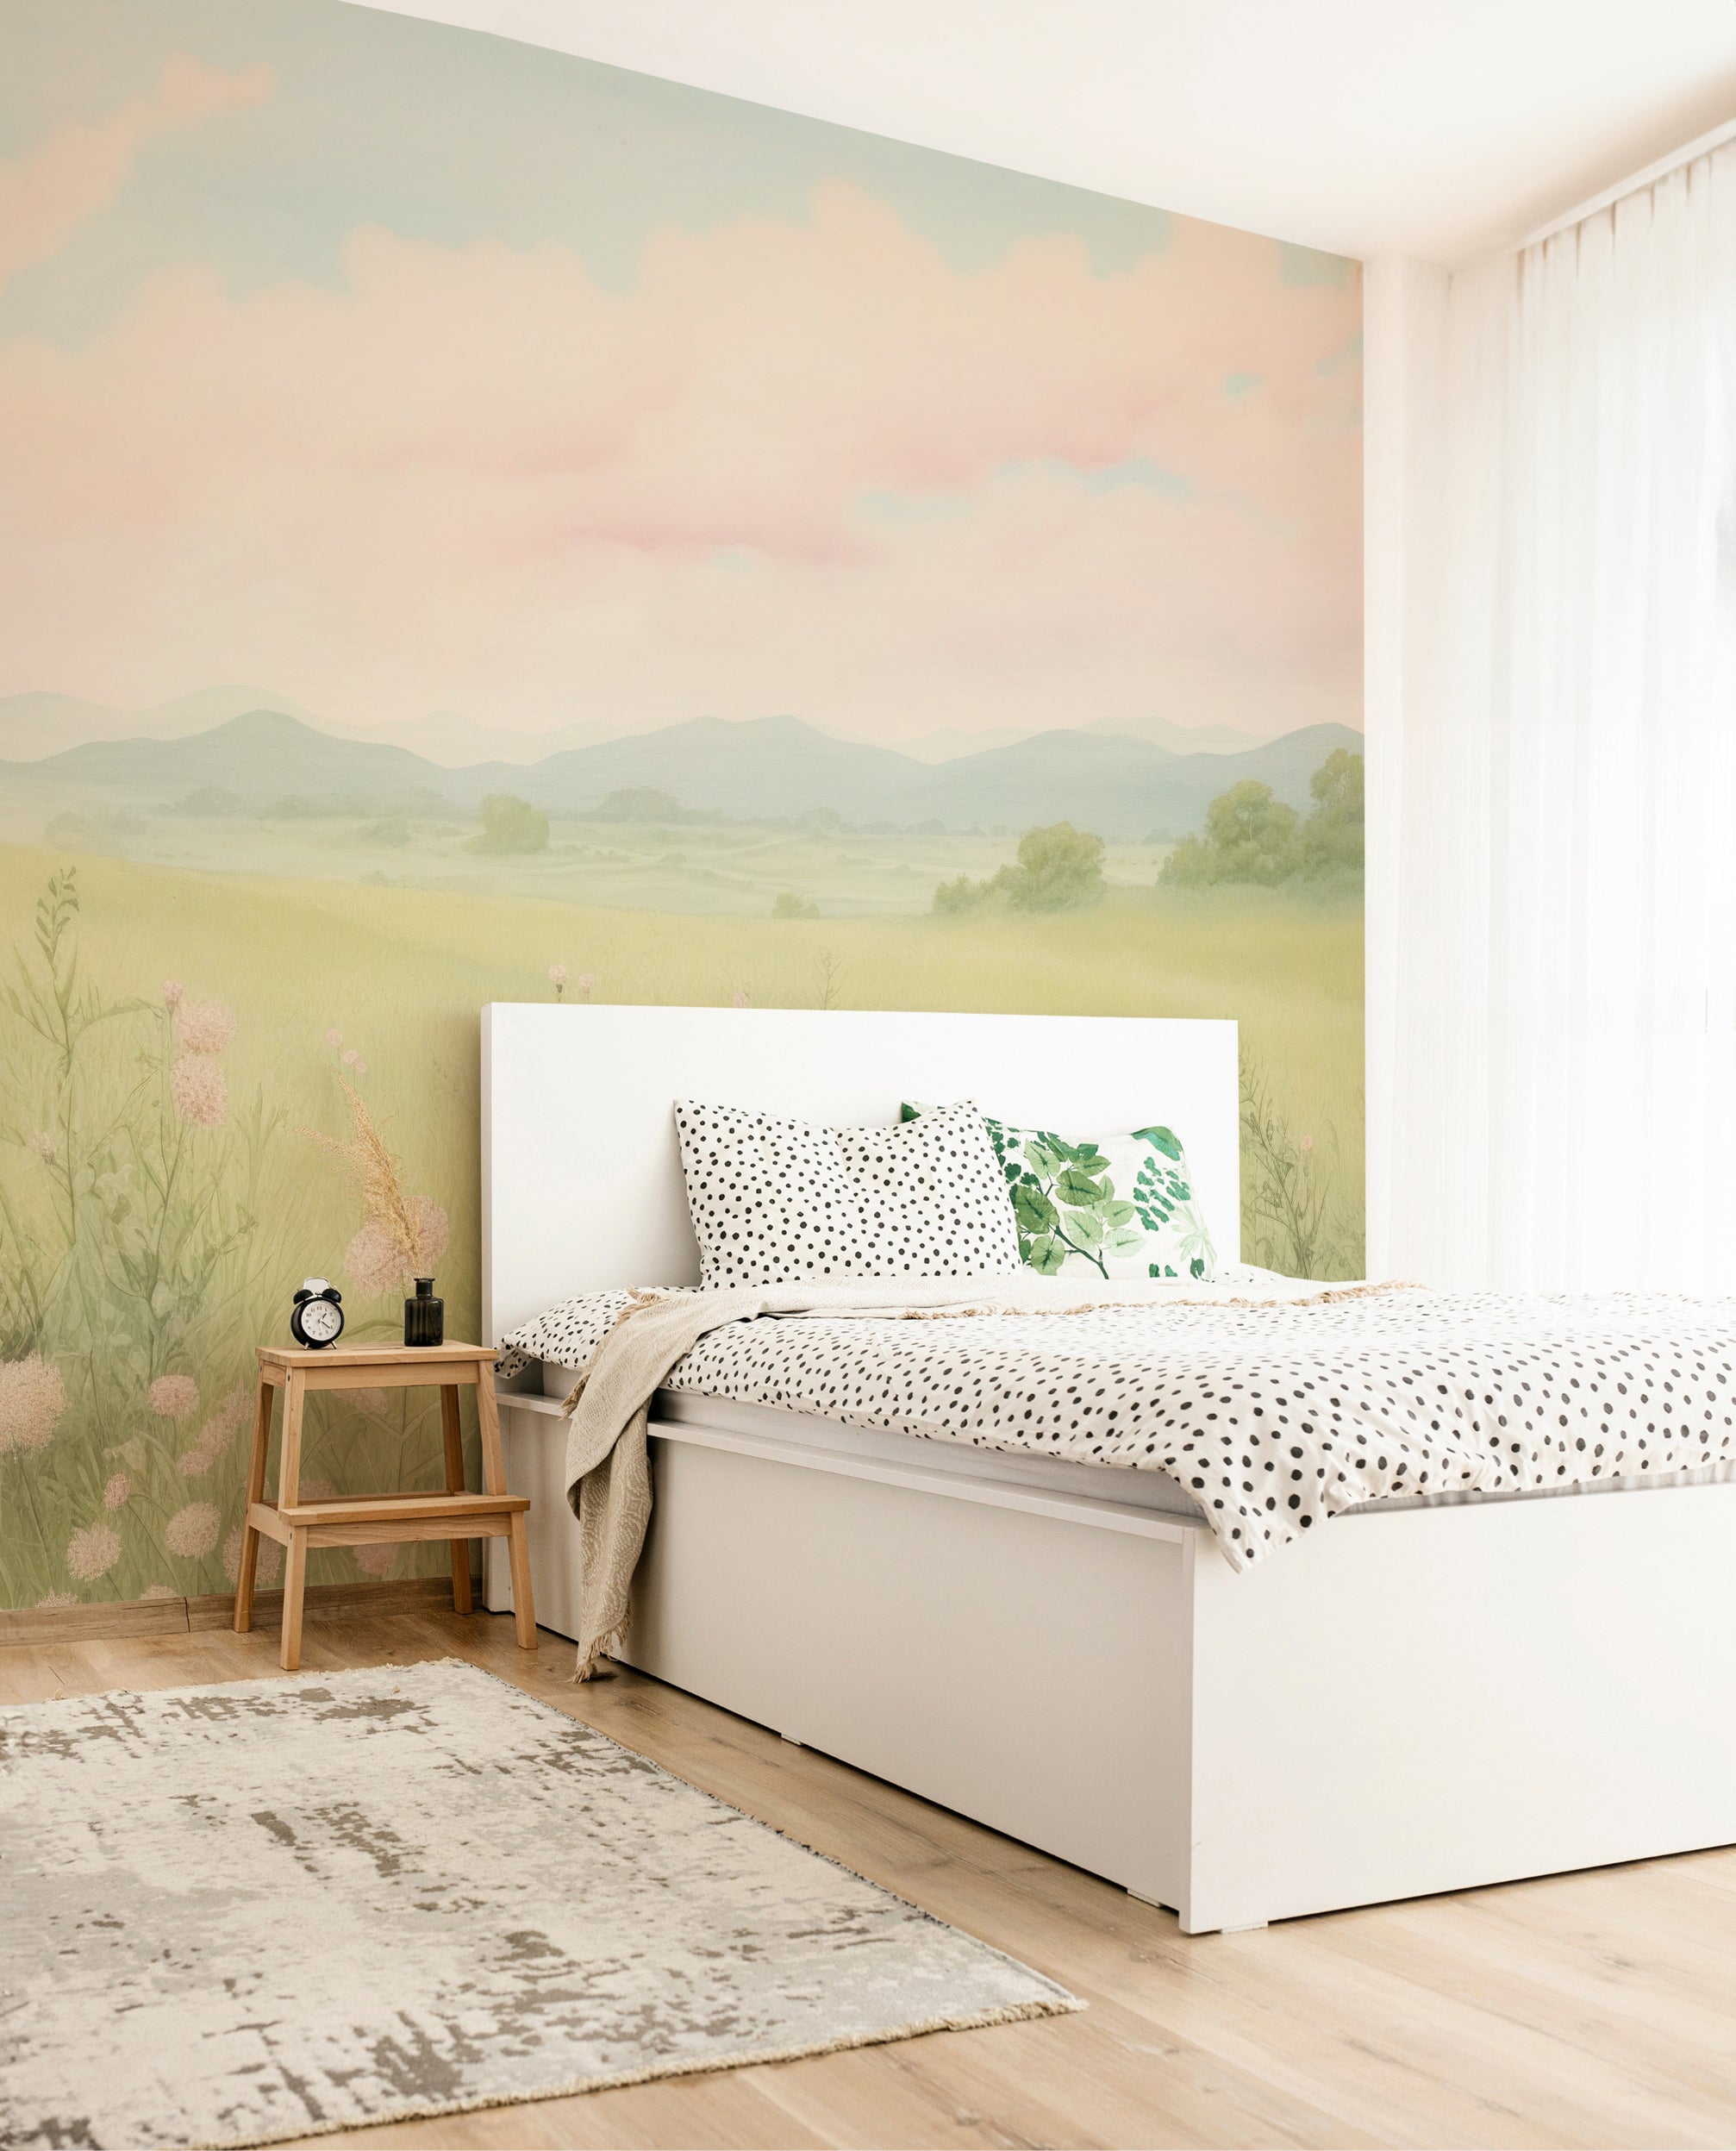 "Panoramic Countryside Mural Panels in Soft Pastels for a Calming Room Atmosphere"